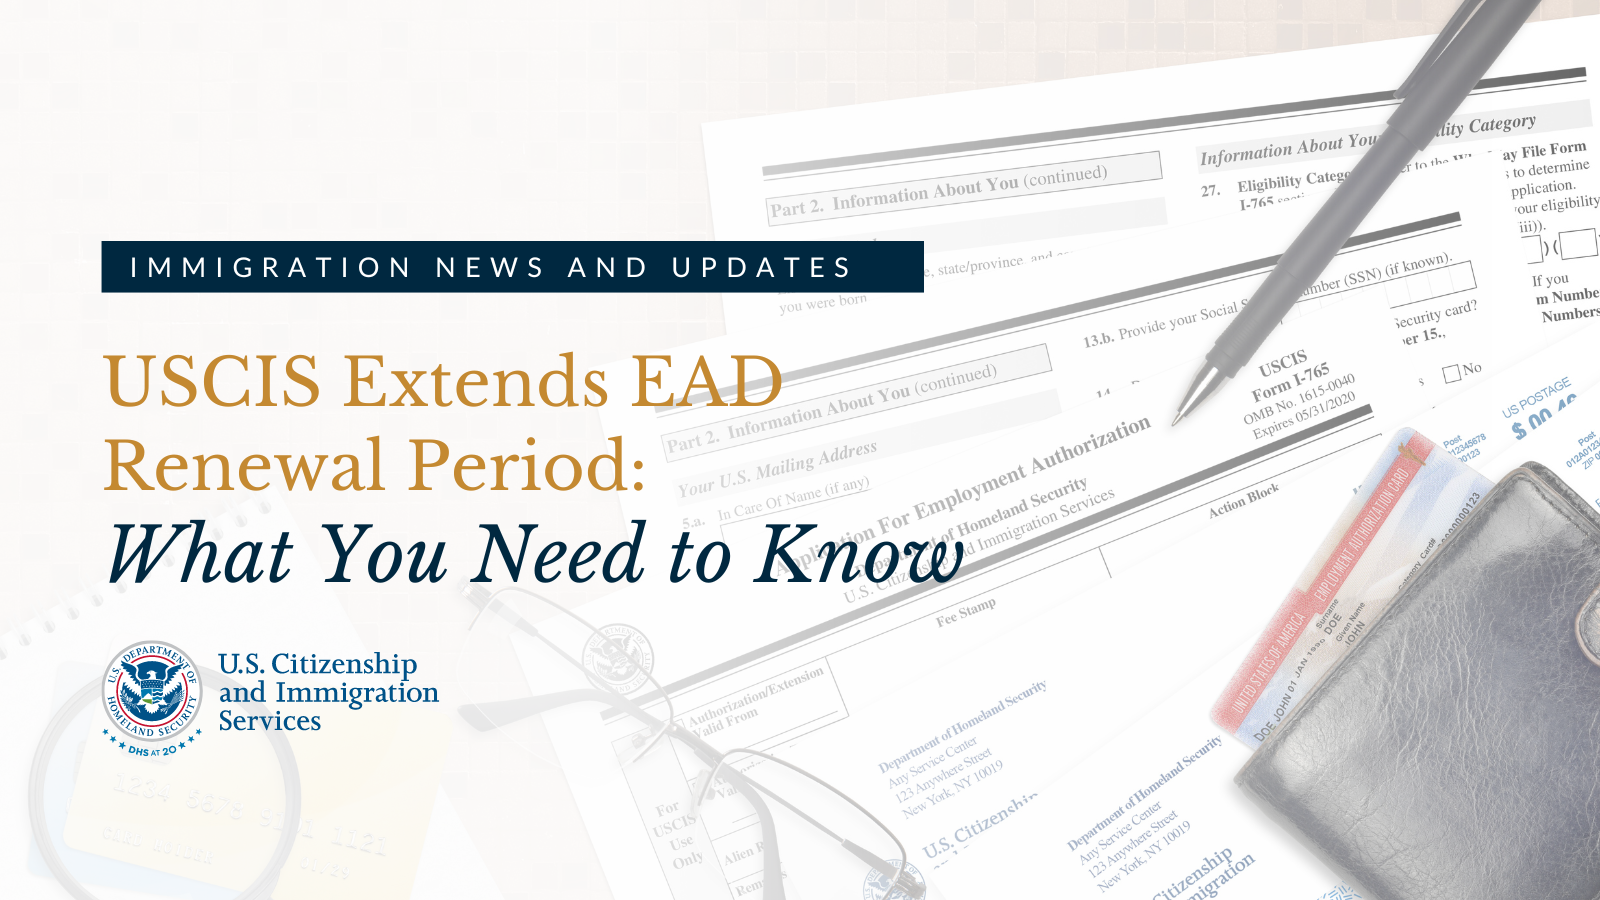 USCIS Extends EAD Renewal Period: What You Need to Know